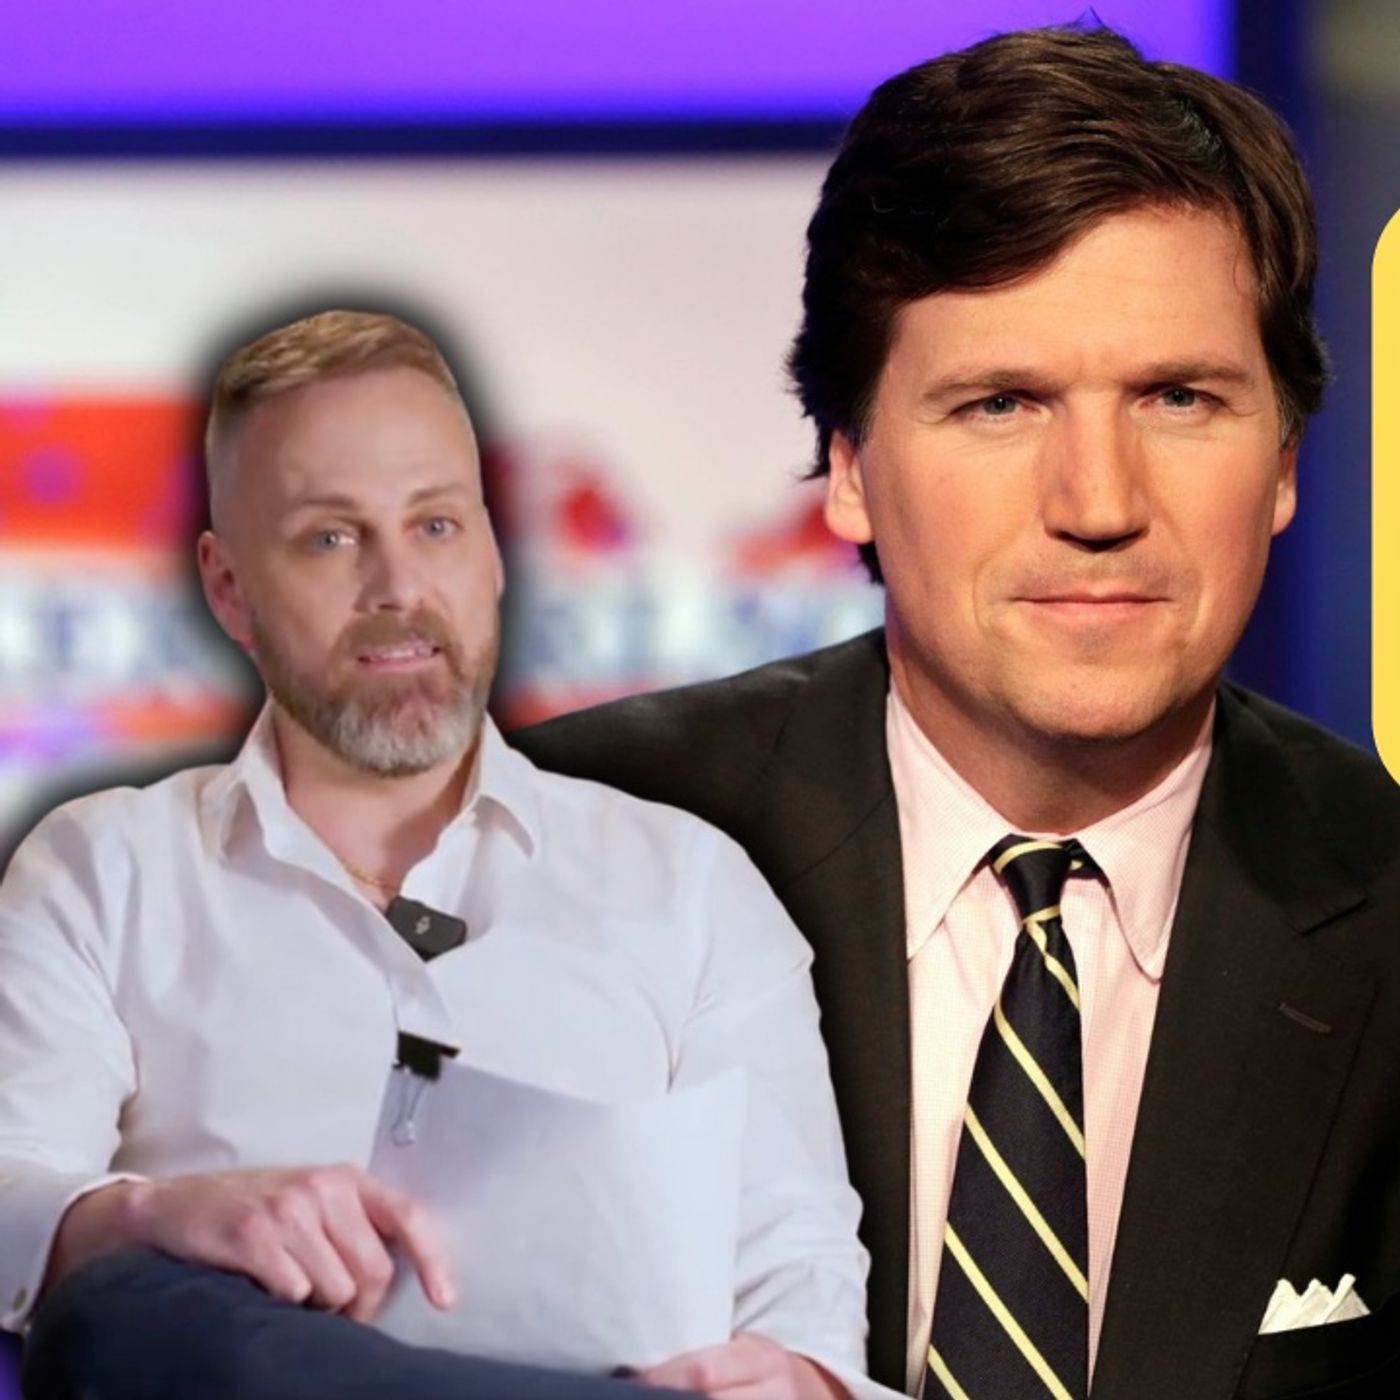 BREAKING! TUCKER Shares Video Revealing Why He Was Ousted At Fox